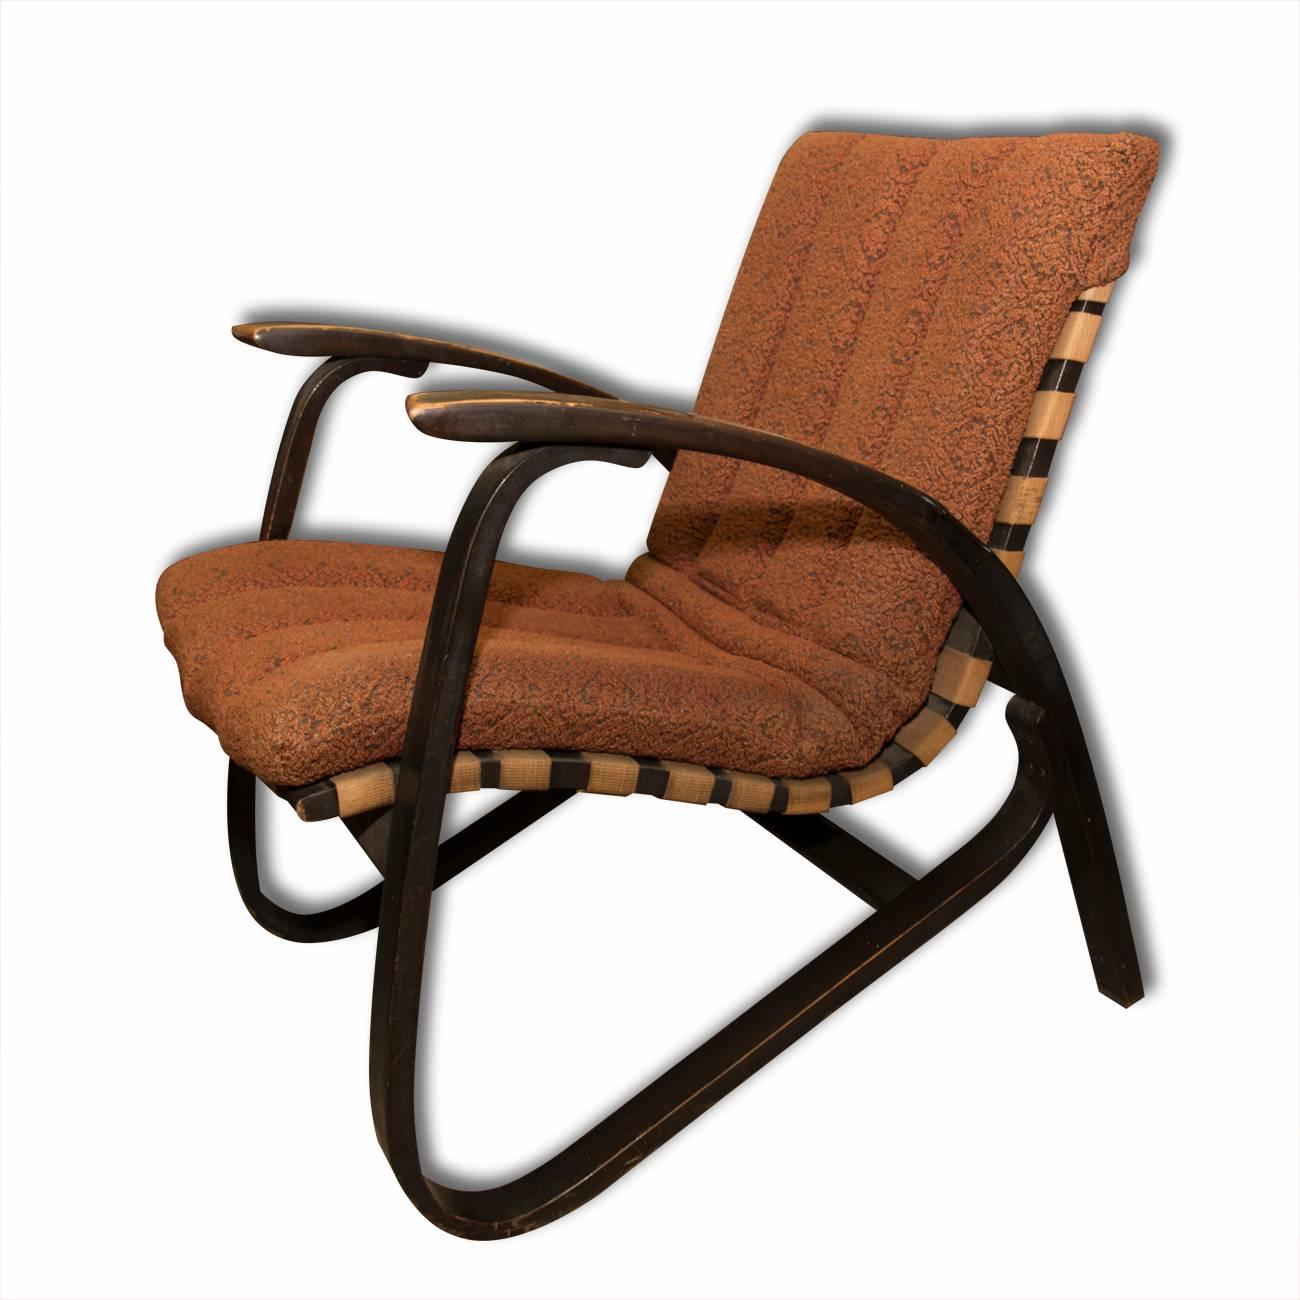 Art Deco Pair of Bentwood Armchairs with Woven Straps by Jan Vanek for UP Zavody, 1930s